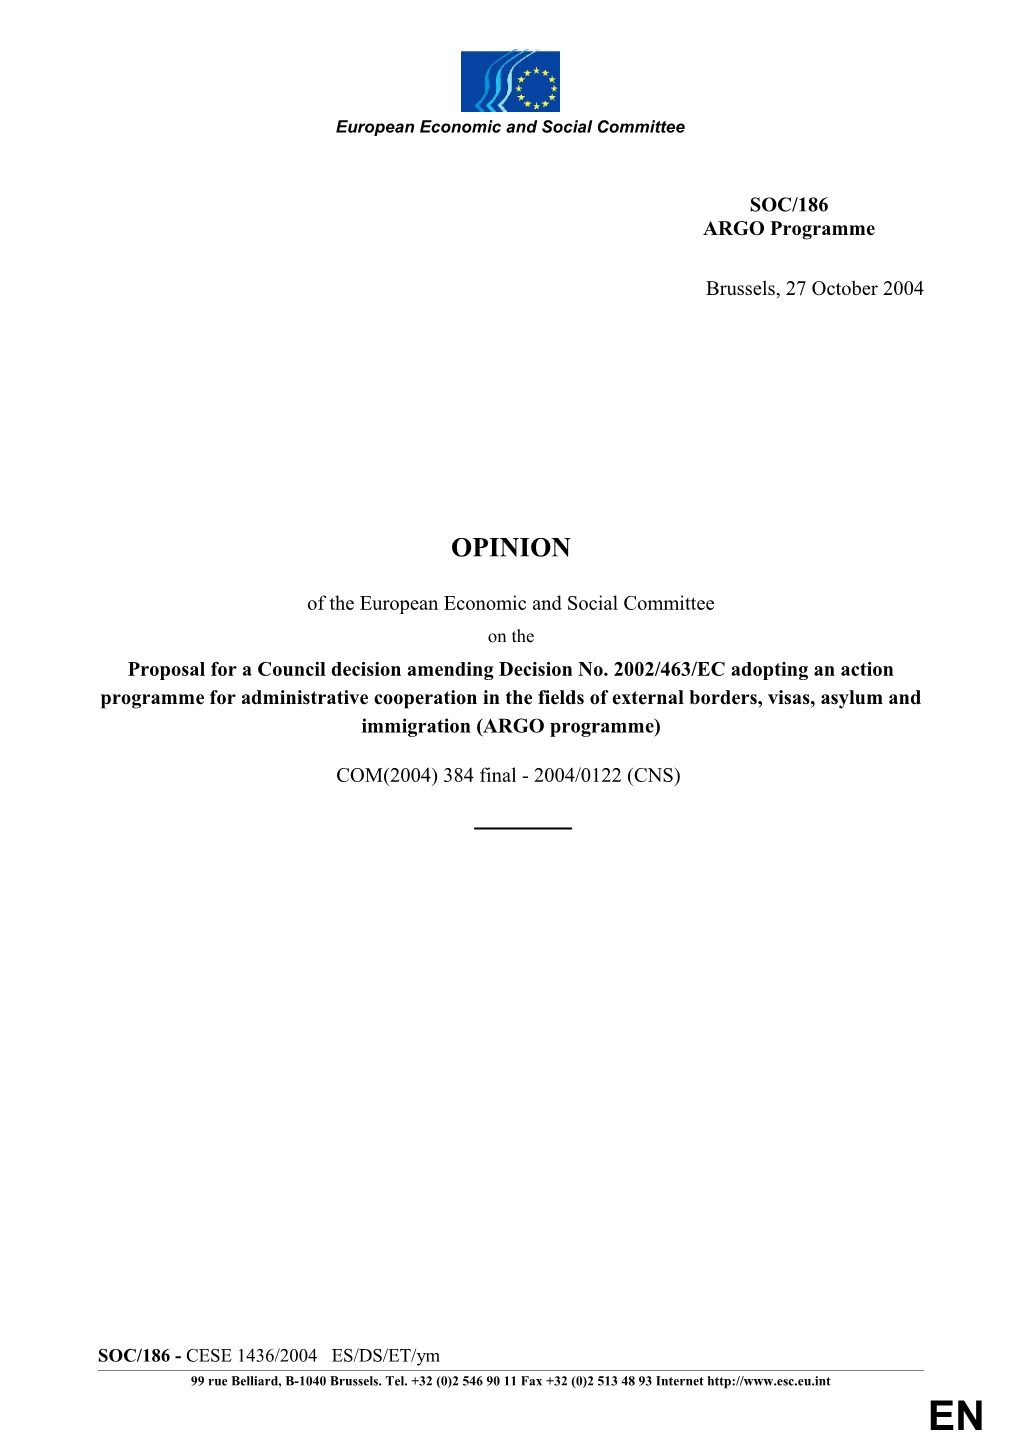 Committee Opinion CES1436-2004 AC EN